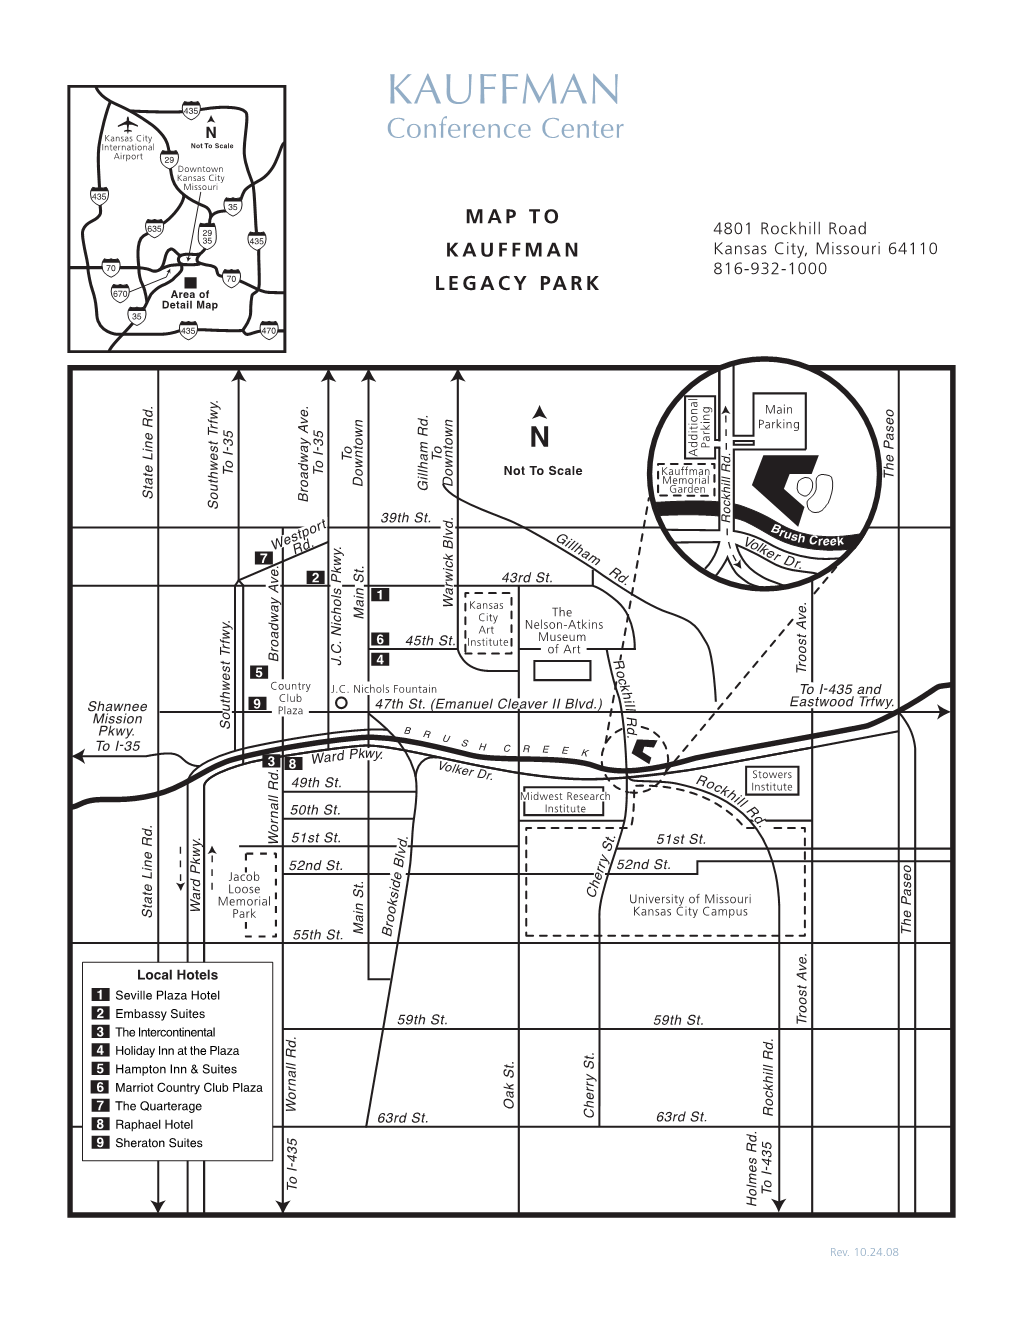 Map to Kauffman Legacy Park